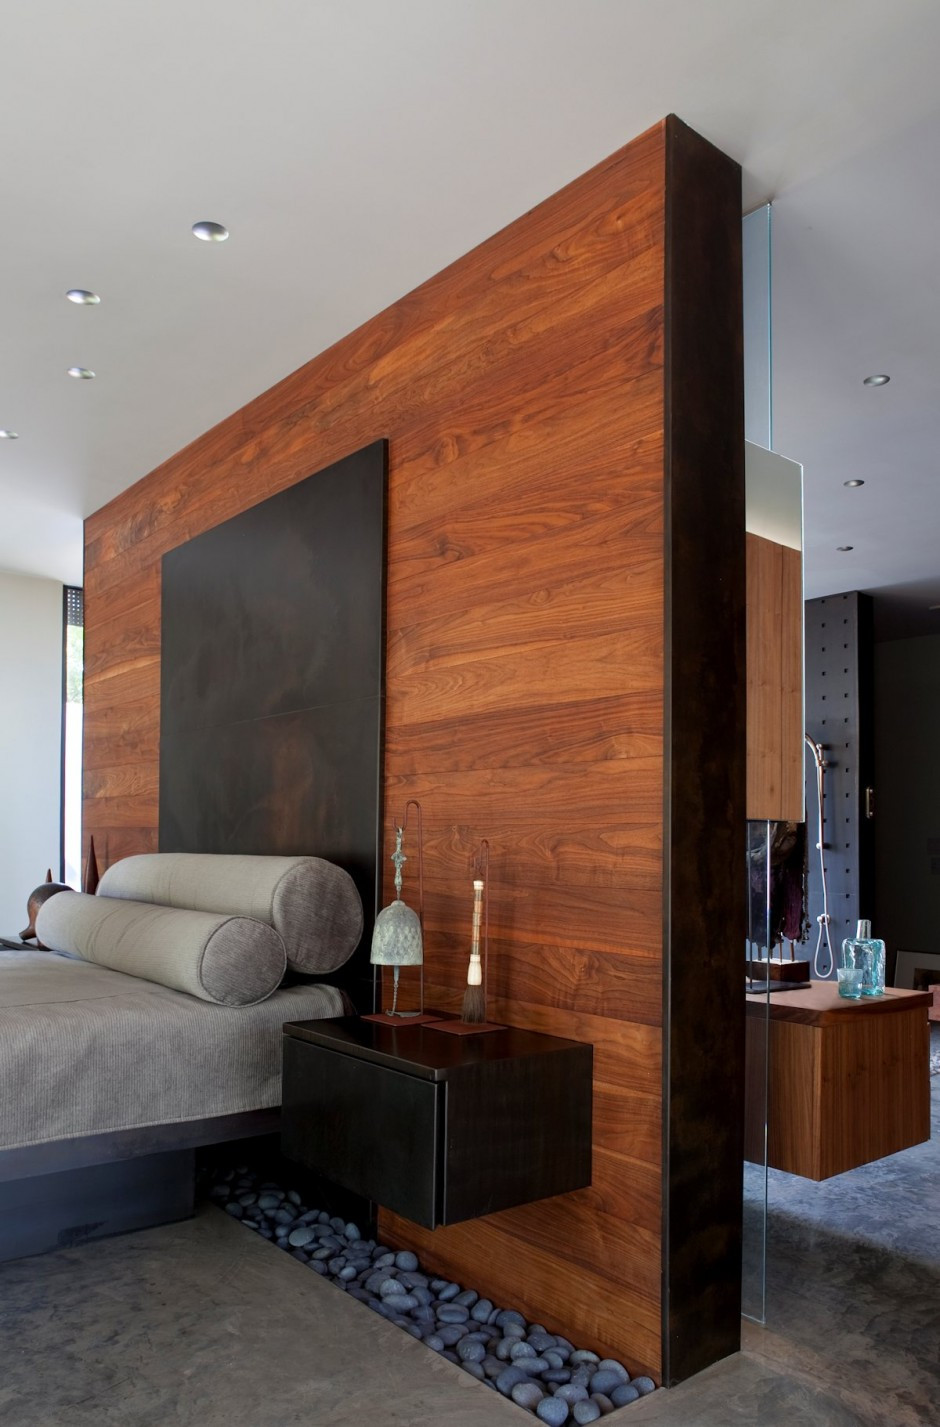 Master Bedroom Accent Wall
 50 Master Bedroom Ideas That Go Beyond The Basics